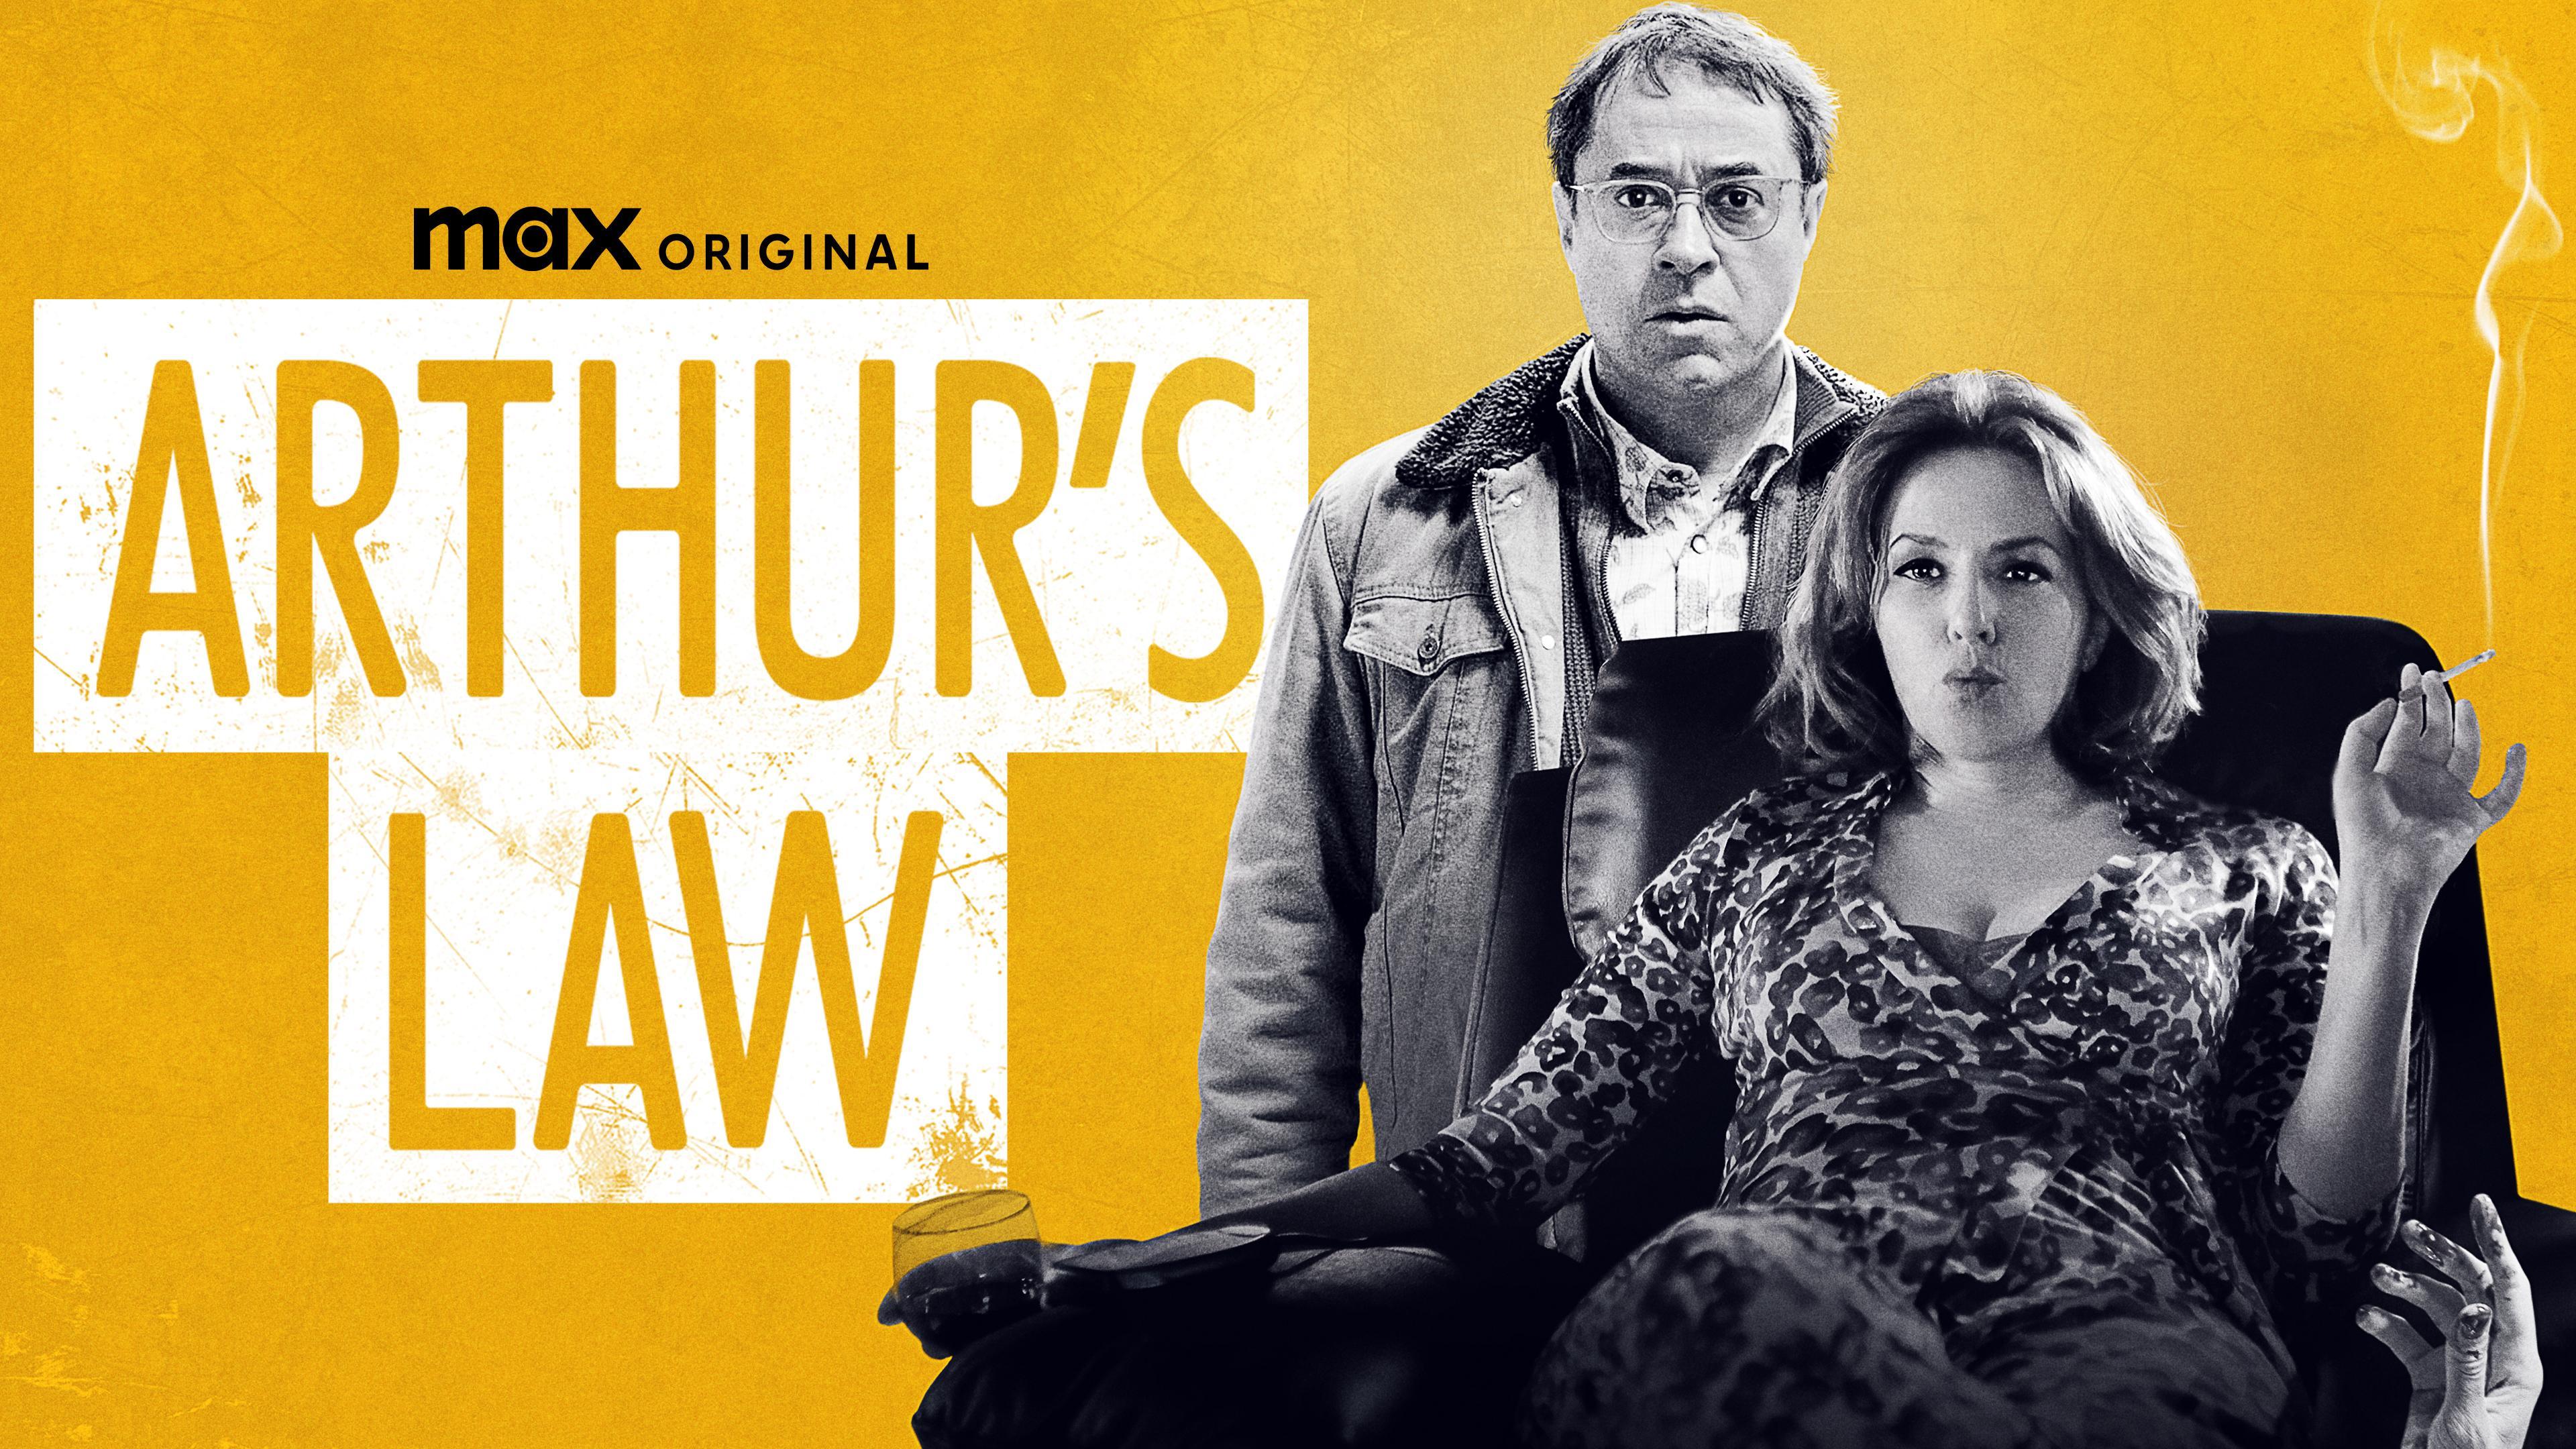 Award-Winning German Series, ARTHUR'S LAW, to Premiere Exclusively on HBO  Max Starting January 7